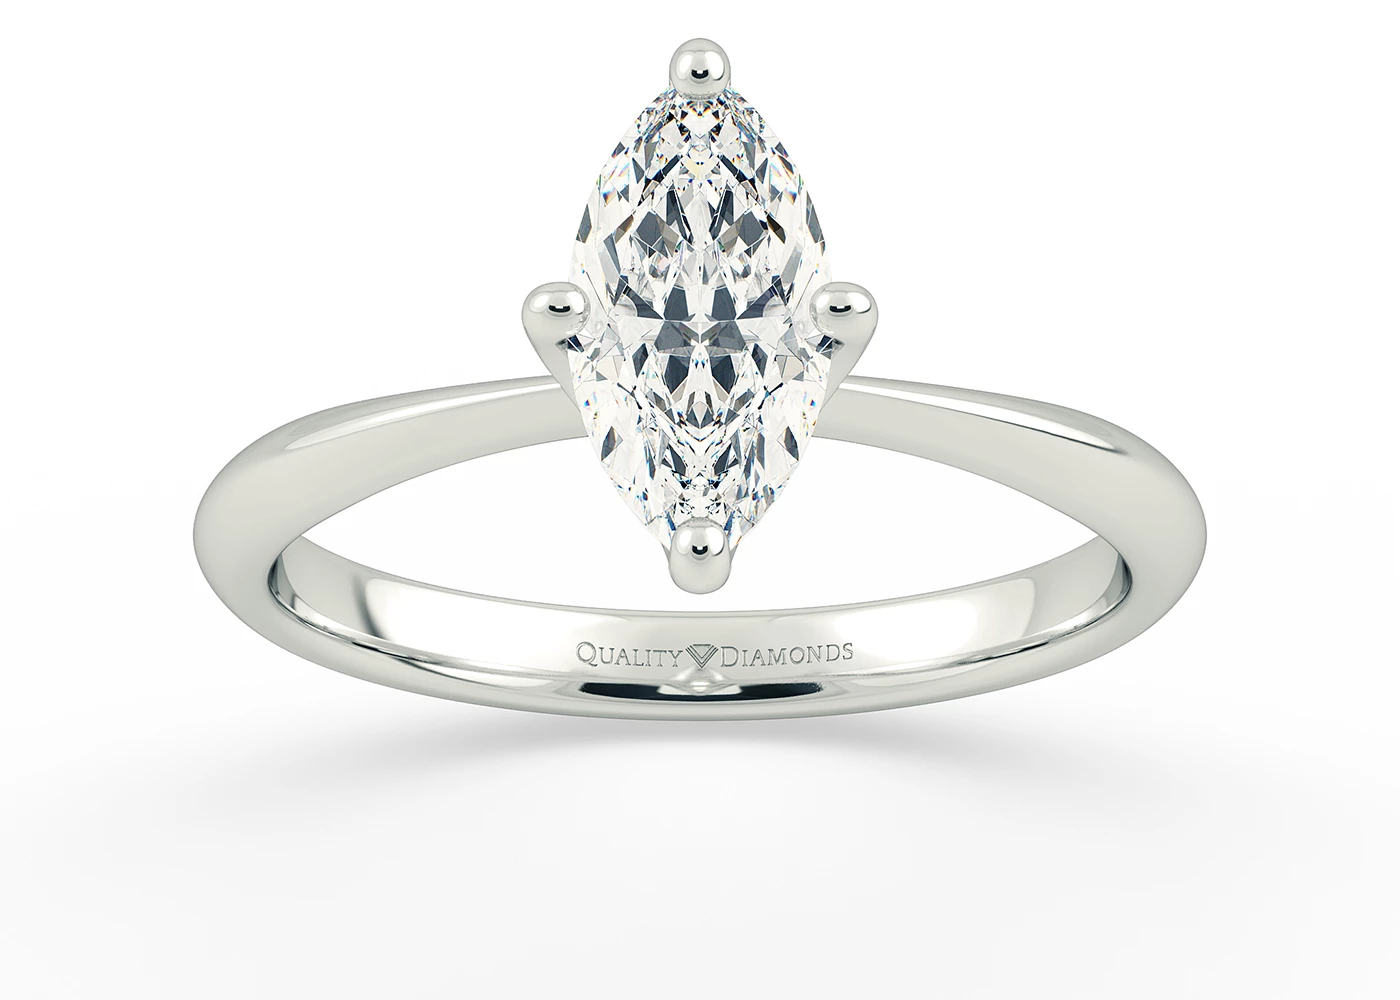 Two Carat Marquise Solitaire Diamond Engagement Ring in Platinum 950